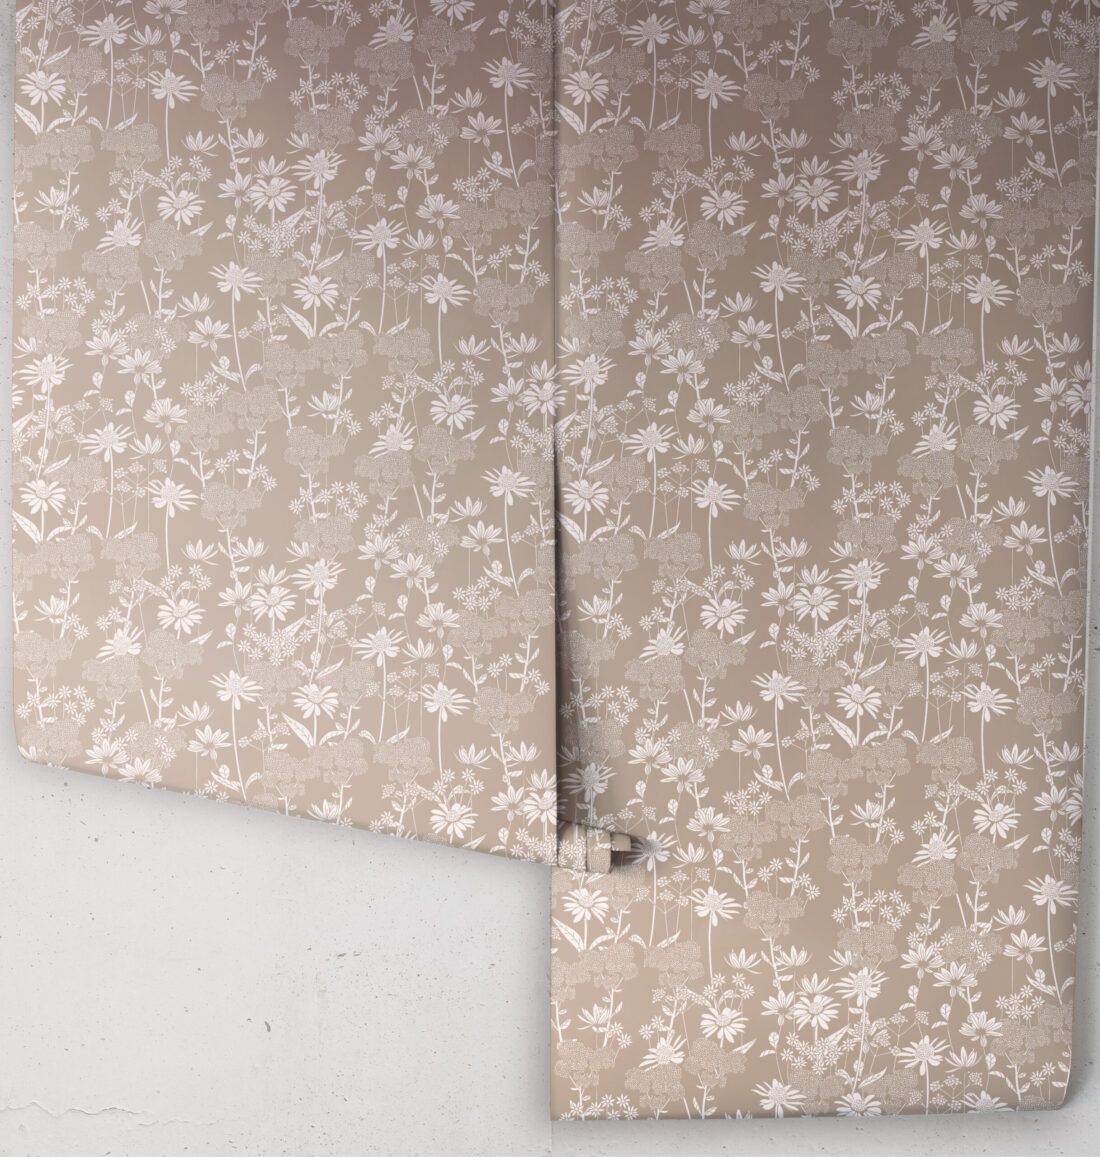 In The Bloom Collection - Wallpaper Republic - London Street Flowers Wallpaper - Colorway: Earth - Rolls